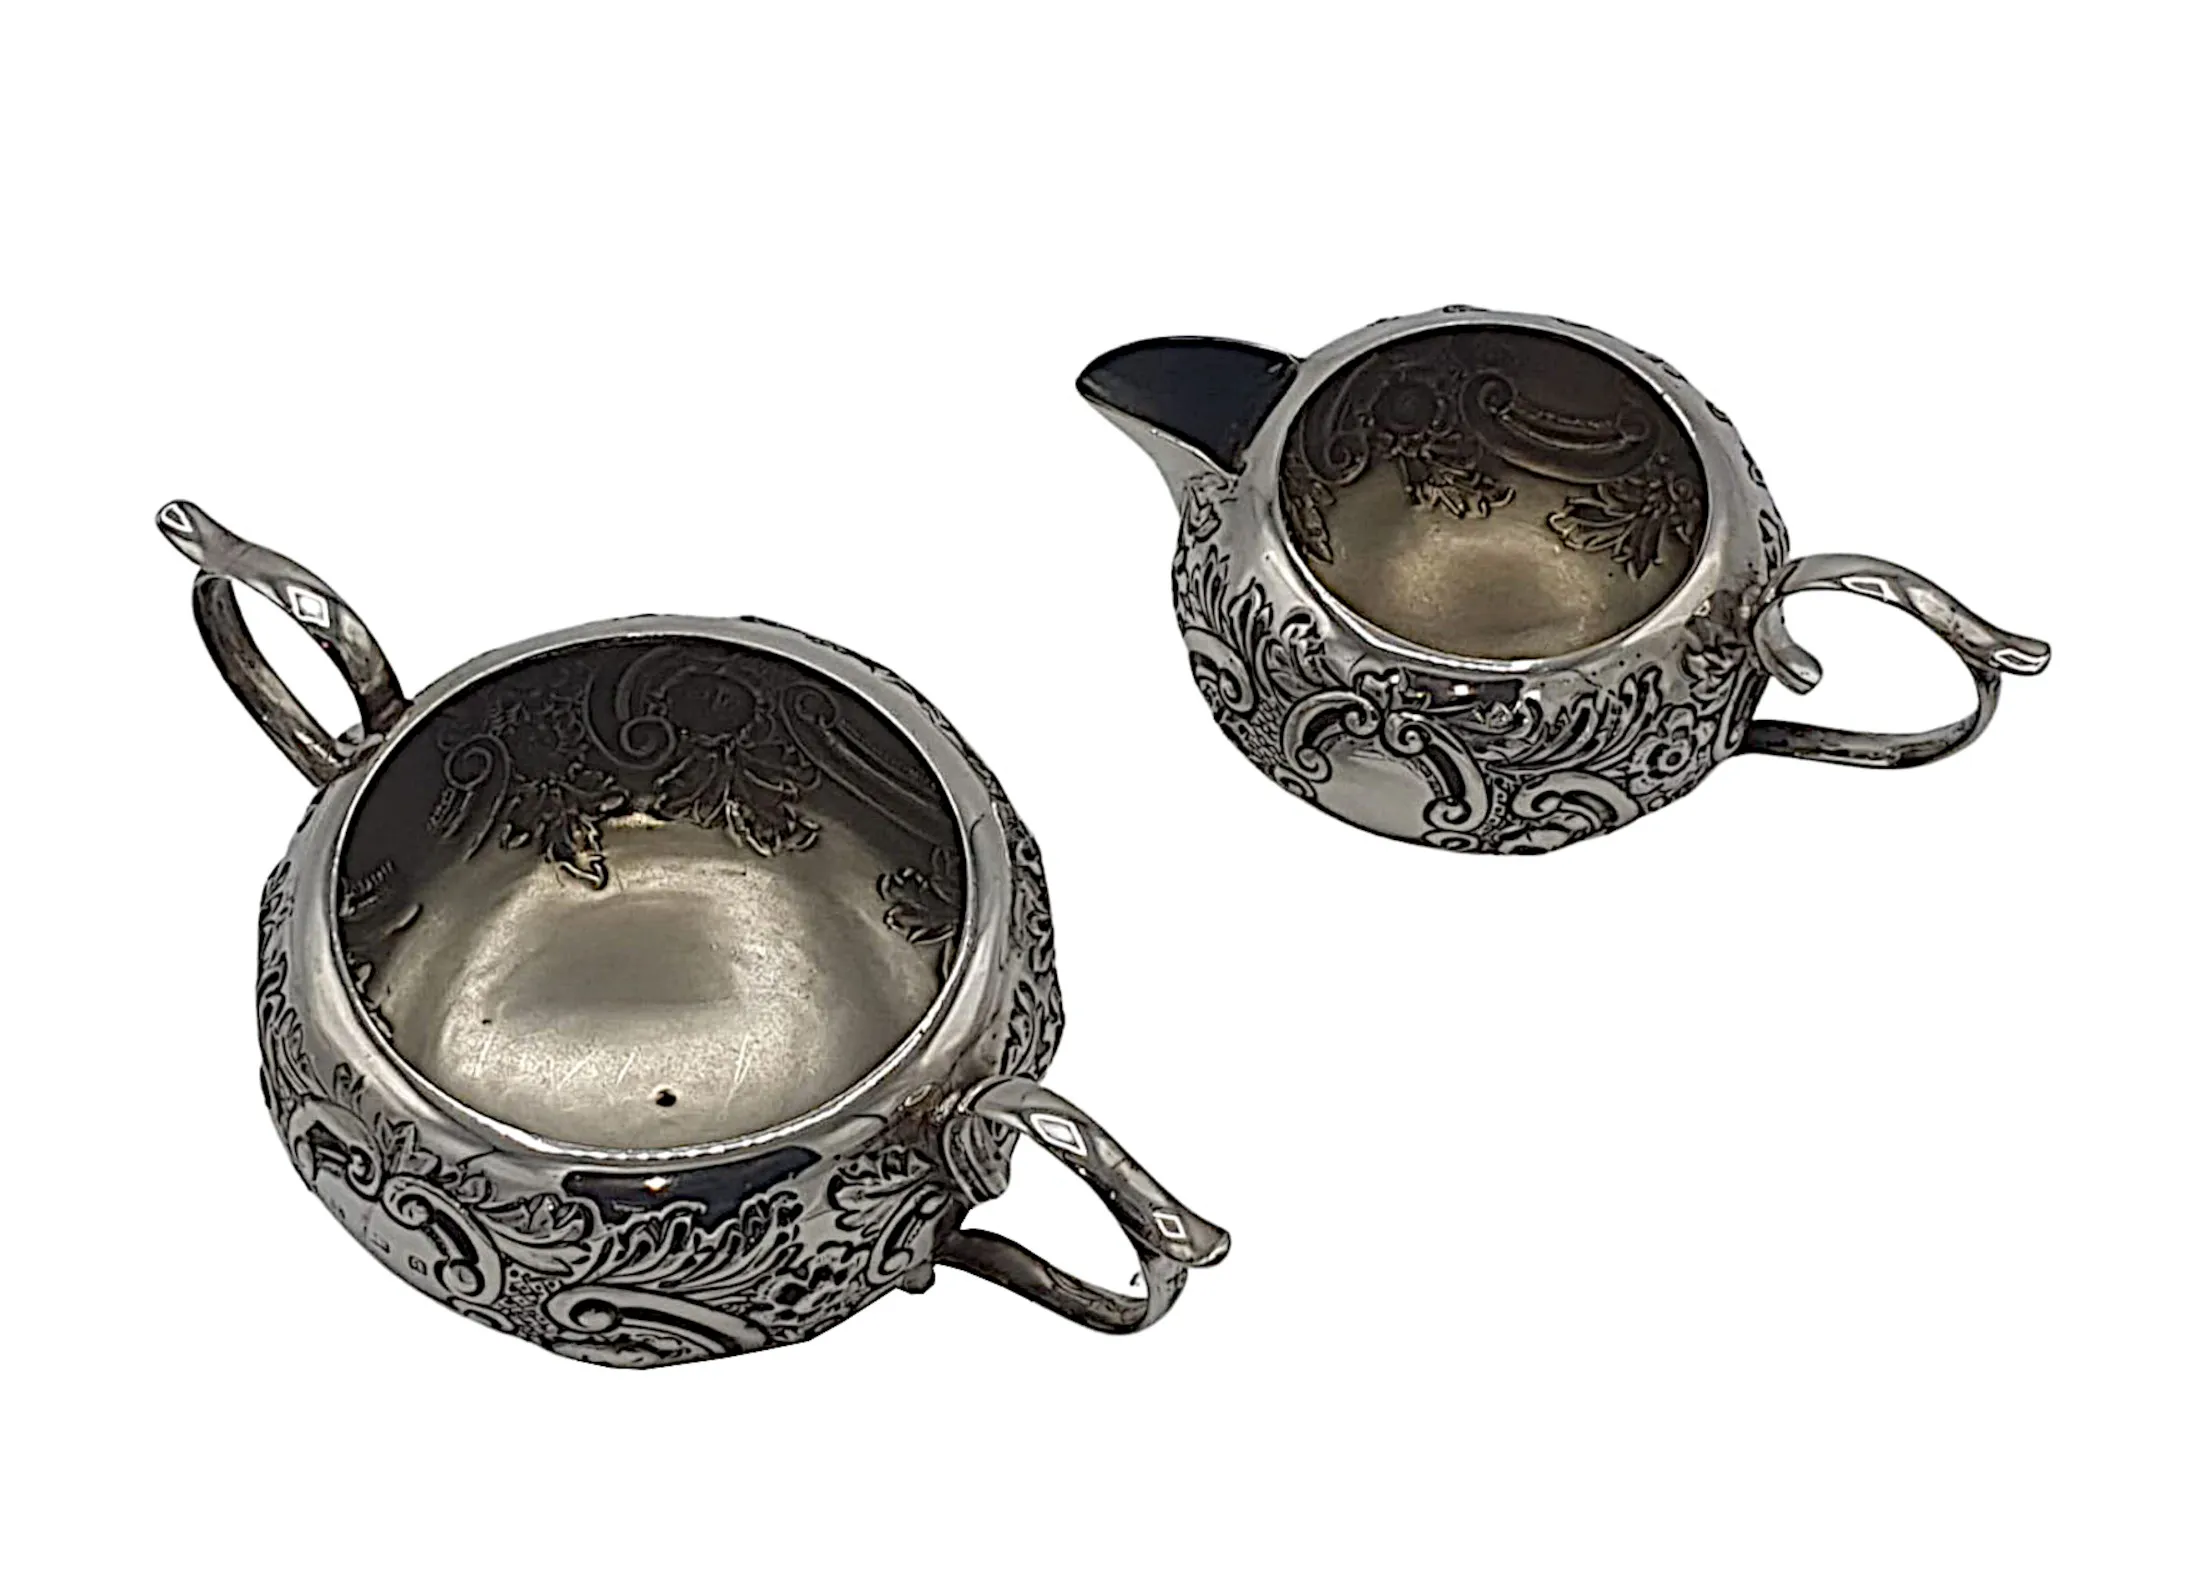 A Beautiful Early 20th Century Sterling Silver Set of Creamer and Sugar Bowl